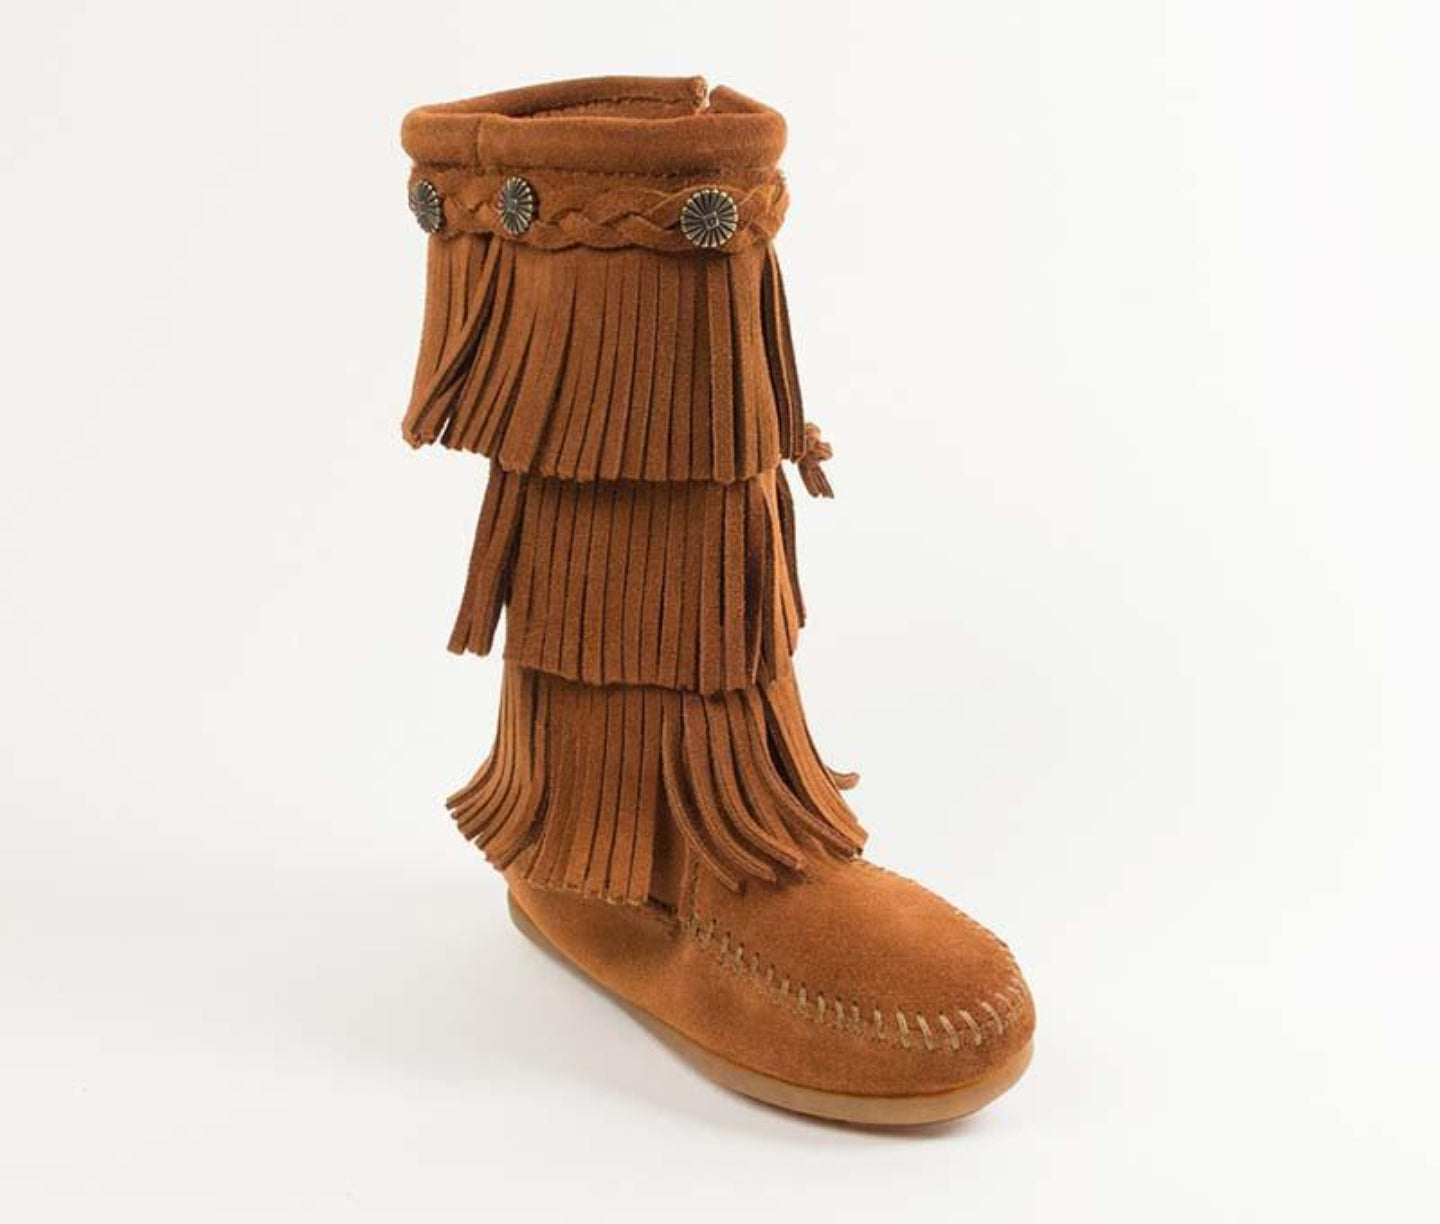 3-Layer Fringe Boot in Brown from 3/4 Angle View